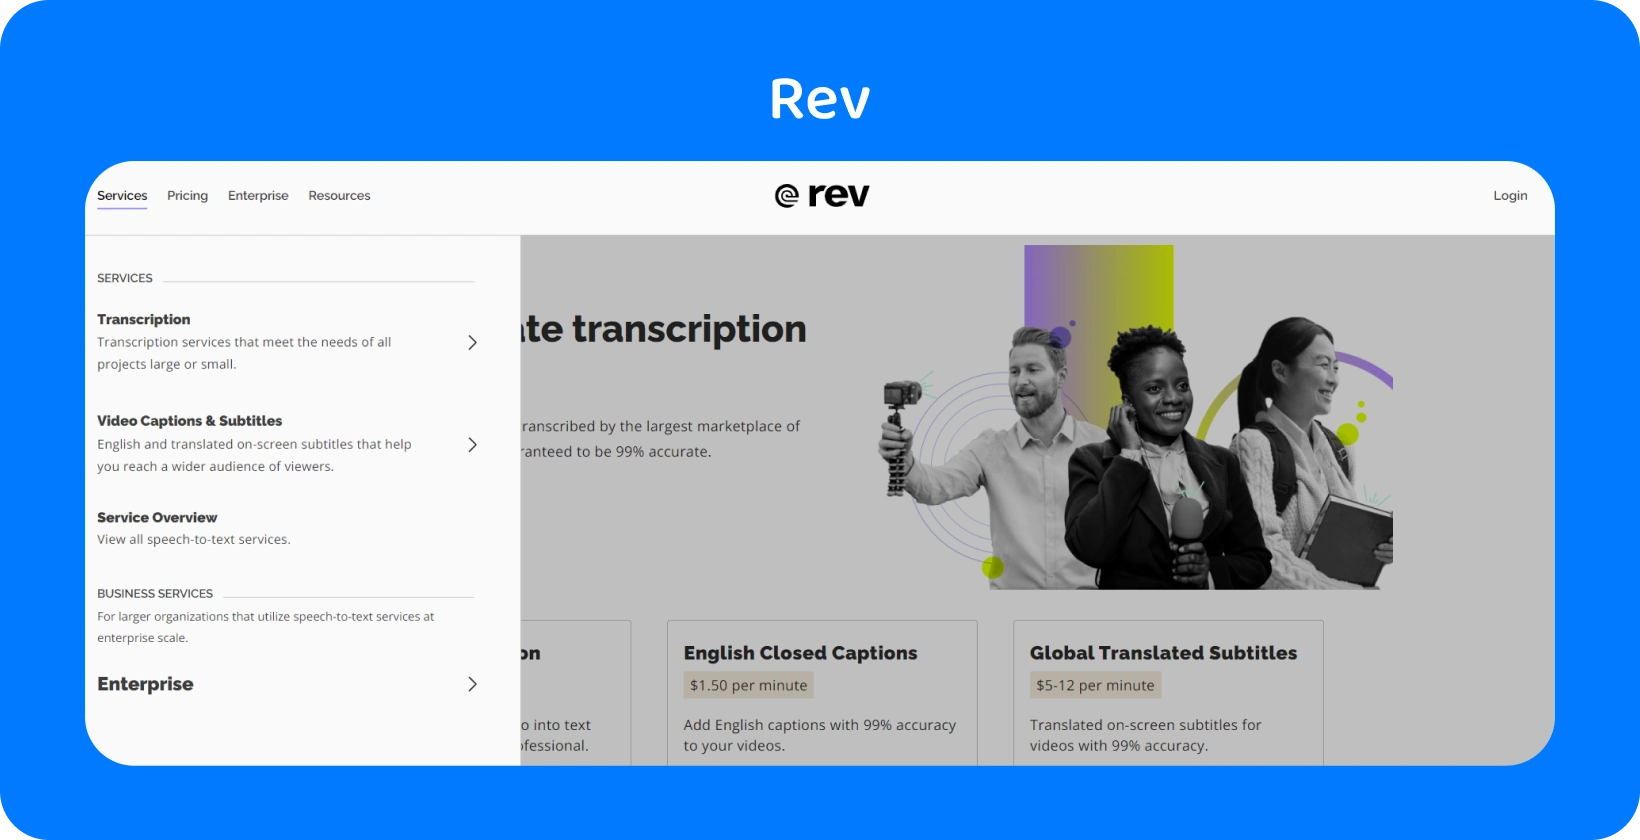 Rev's homepage showcases transcription services for quick, accurate conversion of audio to text for professionals.